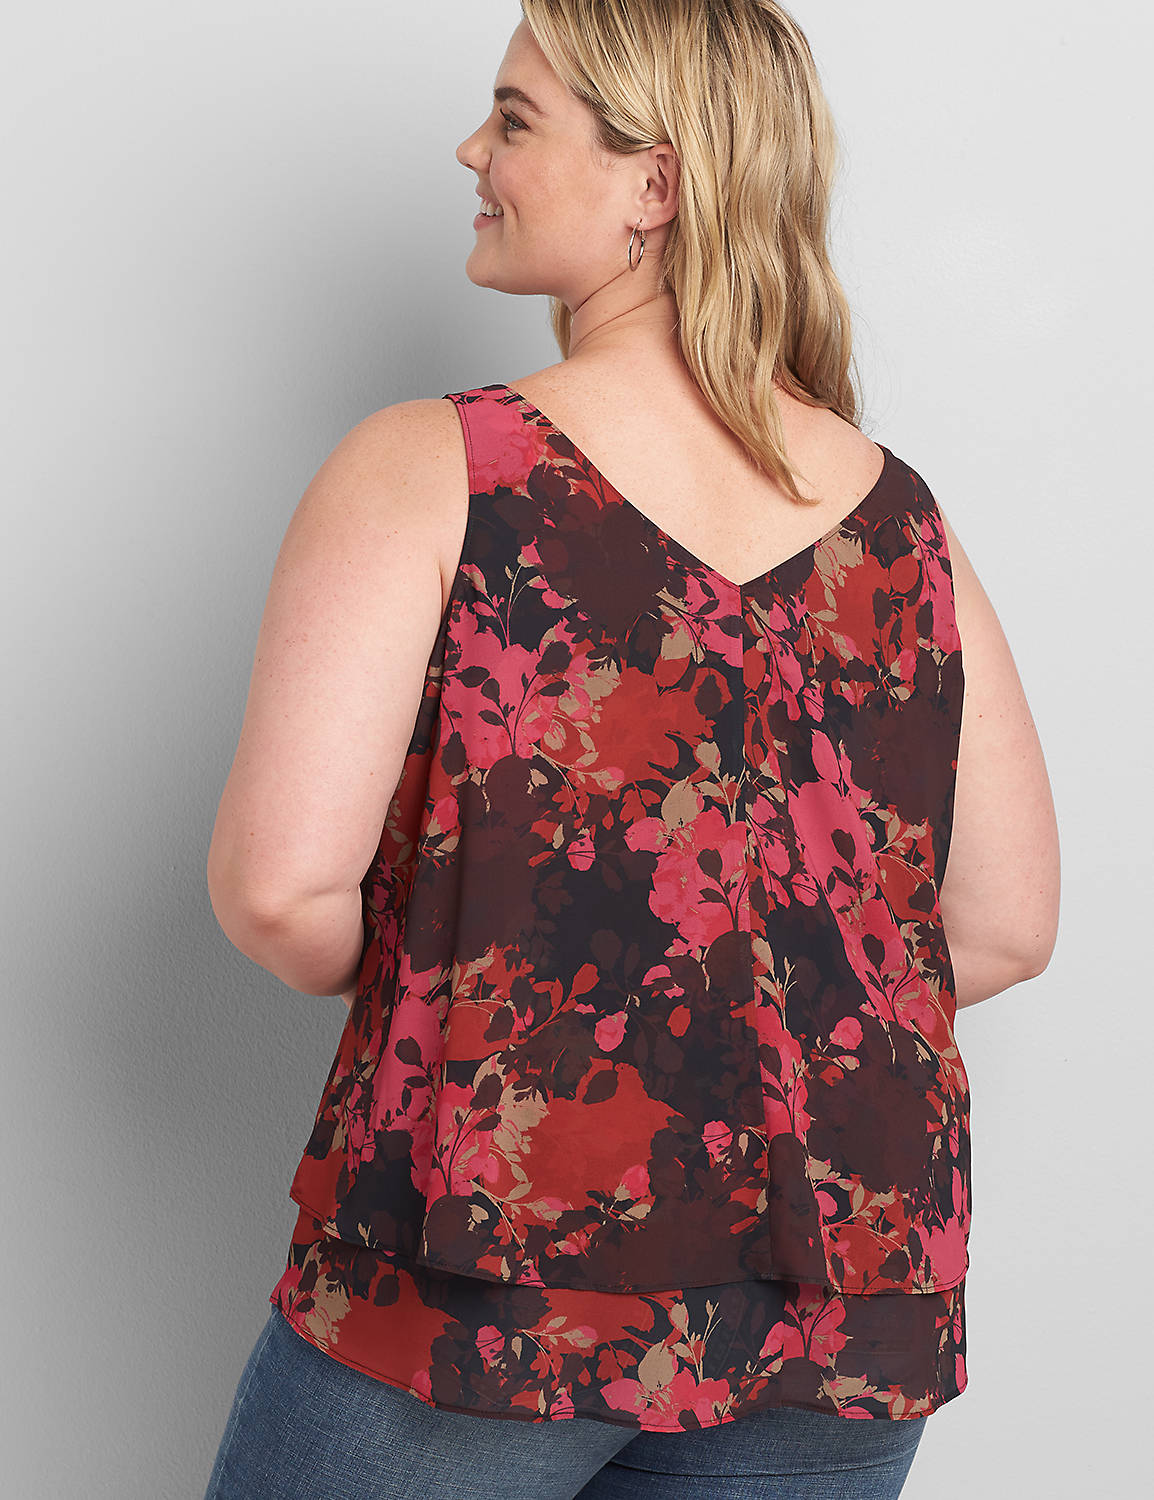 Outlet Sleeveless VNeck Double Layer Swing Tank -1114294:LBH20221_DrybrushedSilhouetteRoses_colorway1:12 Product Image 2